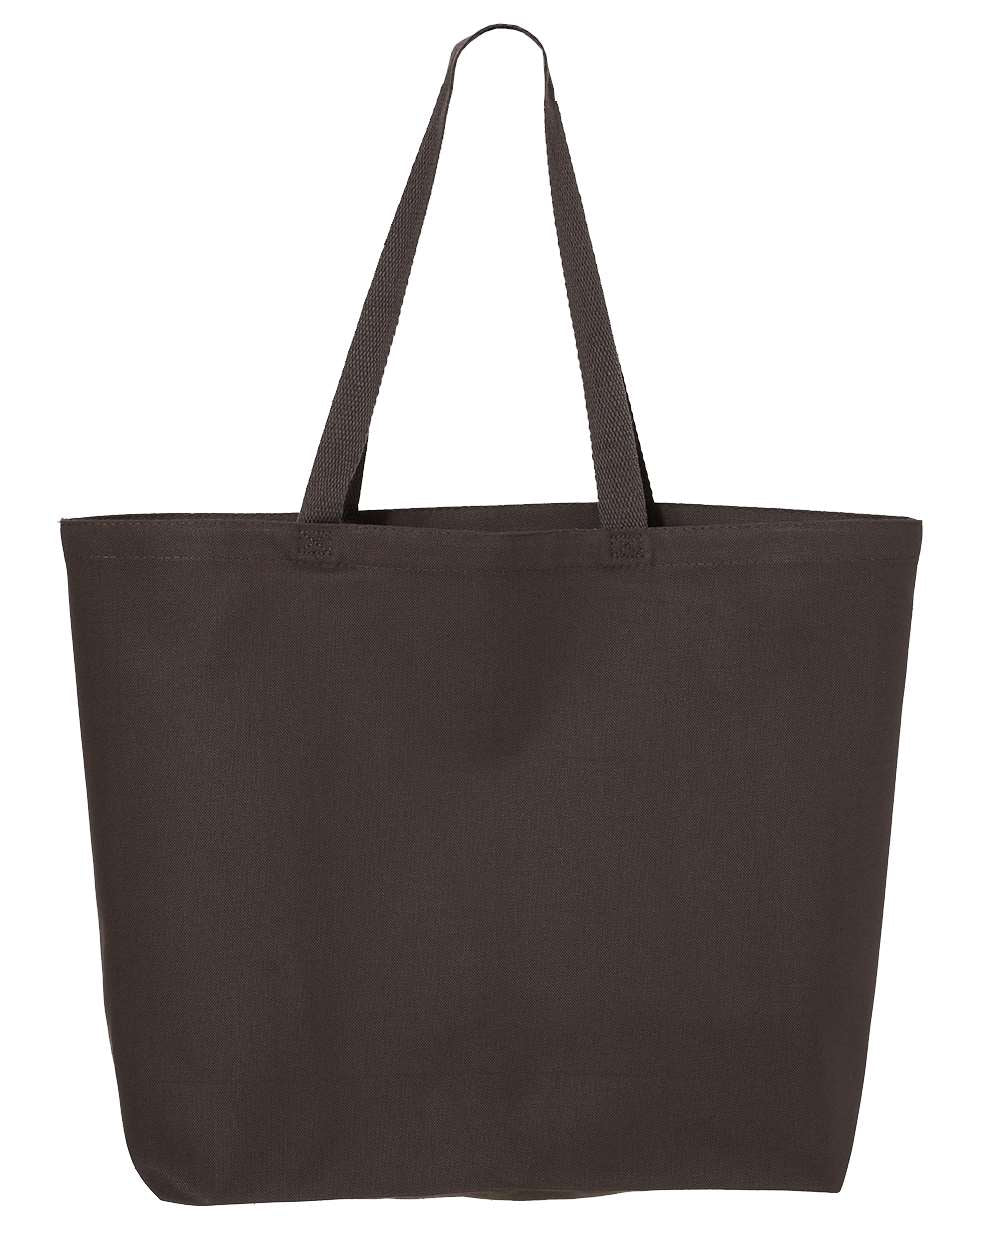 Jumbo Tote 25L with Single Color Print